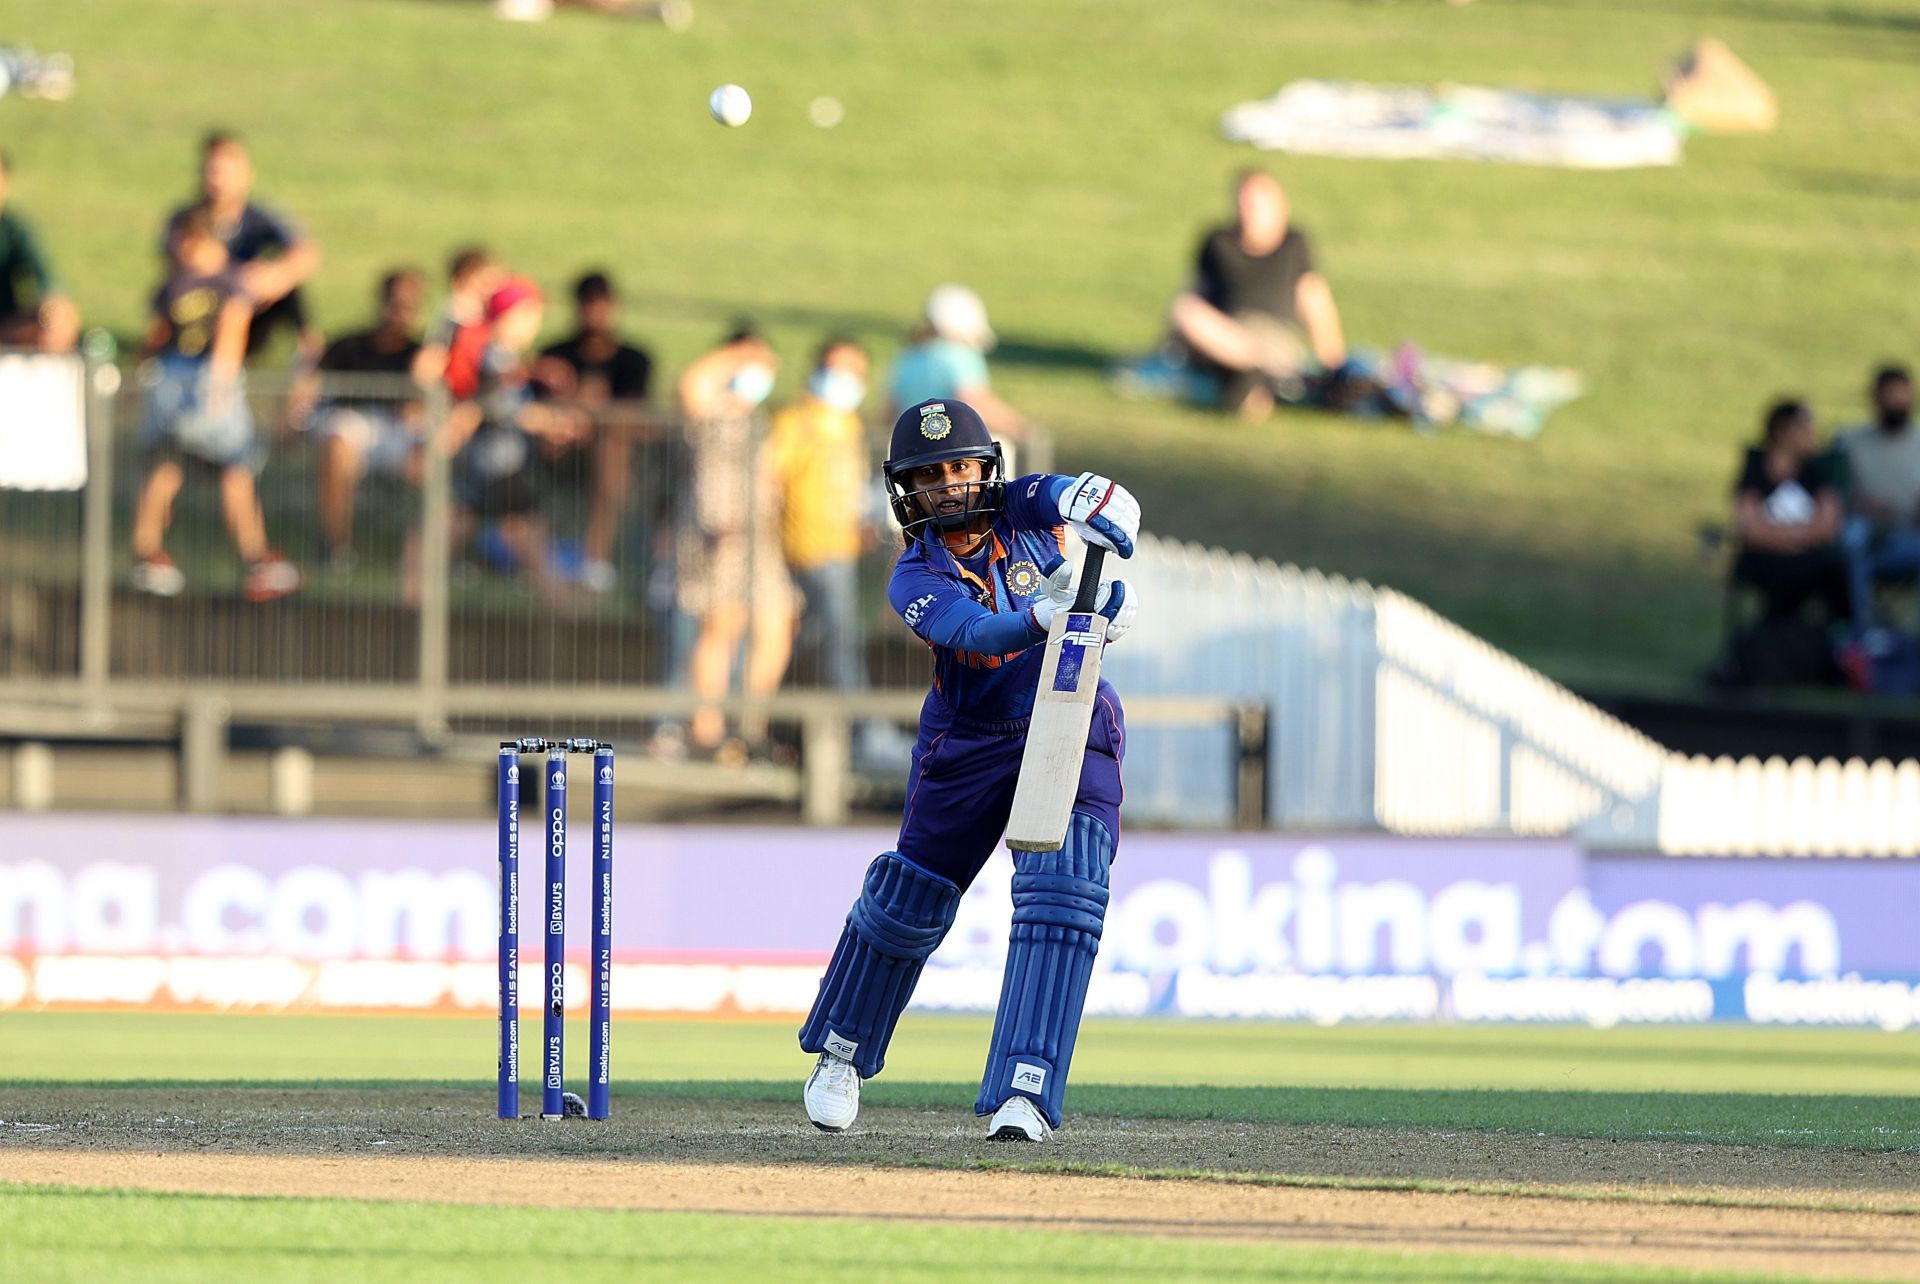 Mithali Raj batted at the No. 4 spot in the World Cup encounter against New Zealand